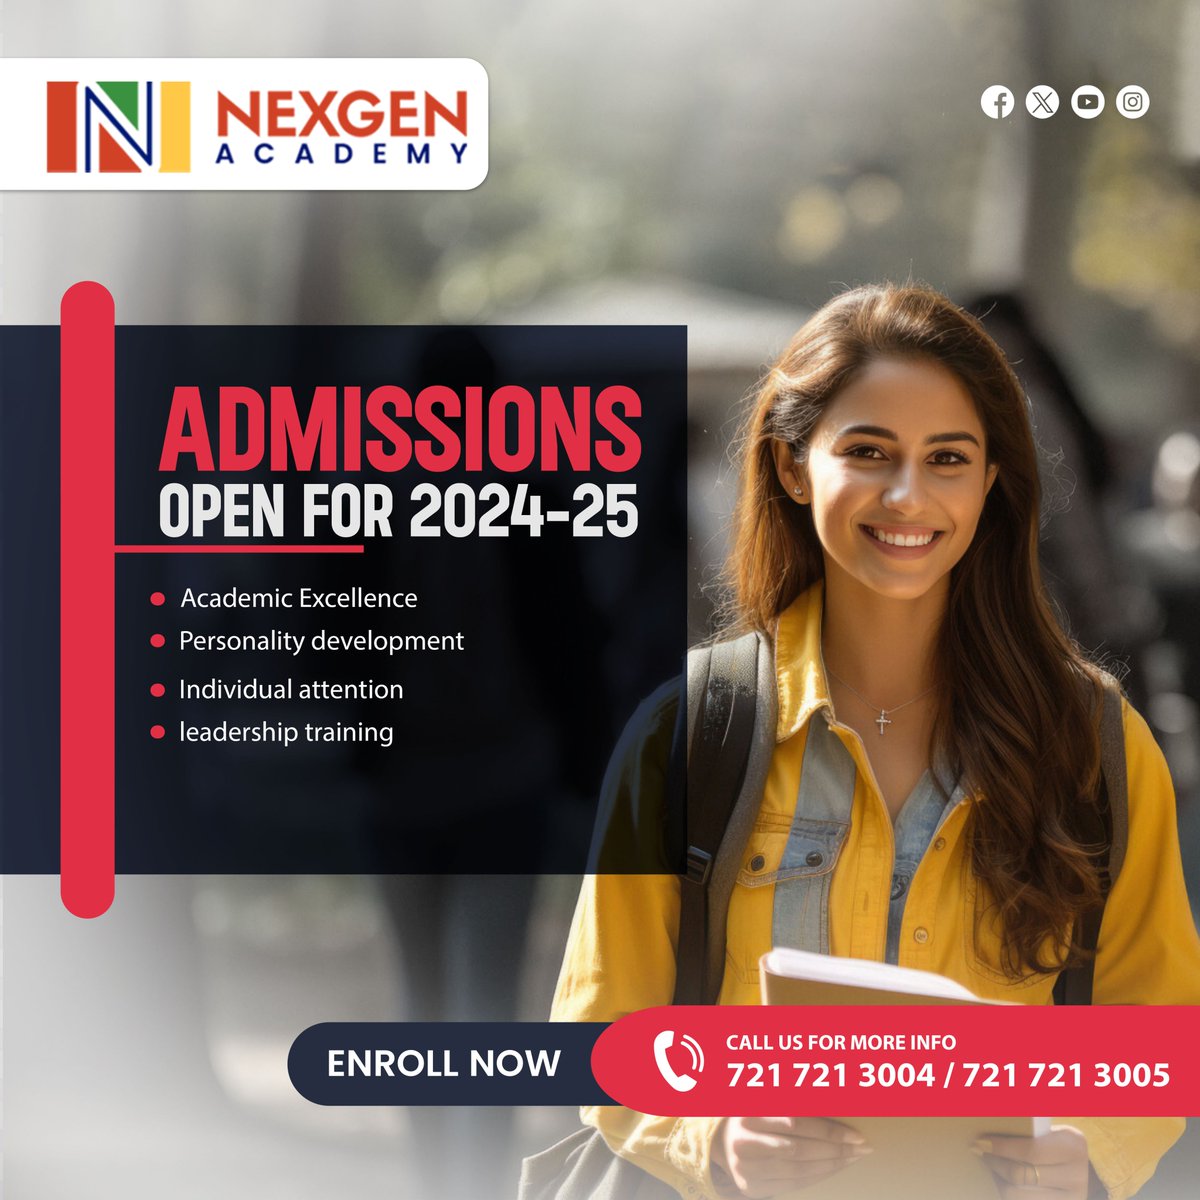 Join Nexgen Academy for the 2024-25 academic year. Experience excellence, personal growth, individualized attention, and leadership training.

Twitter :twitter.com/NDAbengaluru

#NexgenAcademy #NDA #EducationMatters #admission #opennow